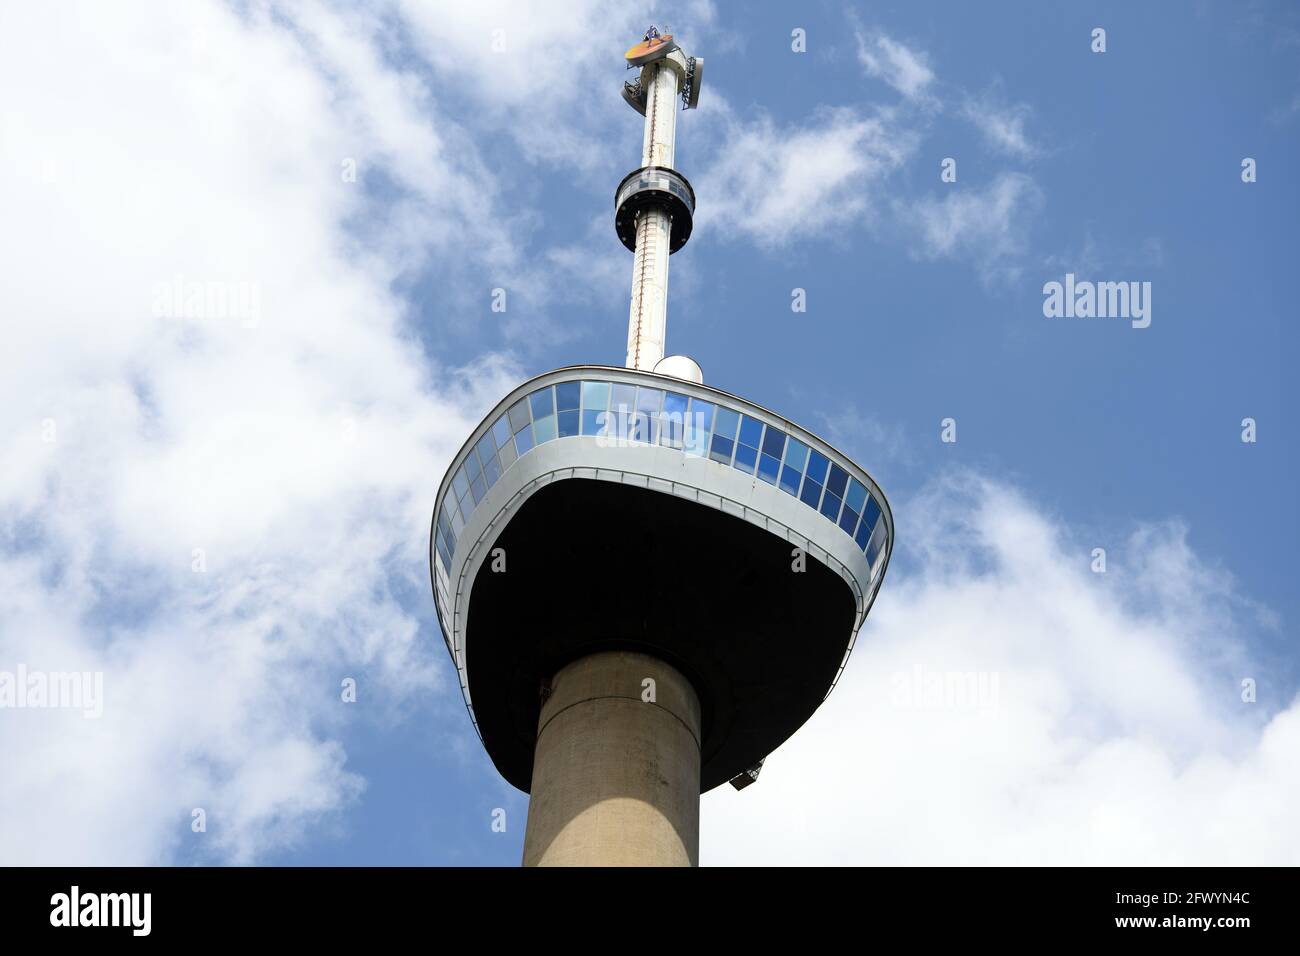 Rotterdam, Netherlands. 21st May, 2021. The Euromast observation tower designed by architect Huig Maaskant. The tower was built in the 1960s for the garden exhibition Floriade and was initially 101 meters high. In the 1970s, the 'Space Tower' was added on top with a further 84 metres. At a height of 96 metres, there is a visitor platform and a restaurant called the Crow's Nest. Credit: Soeren Stache/dpa-Zentralbild/dpa/Alamy Live News Stock Photo